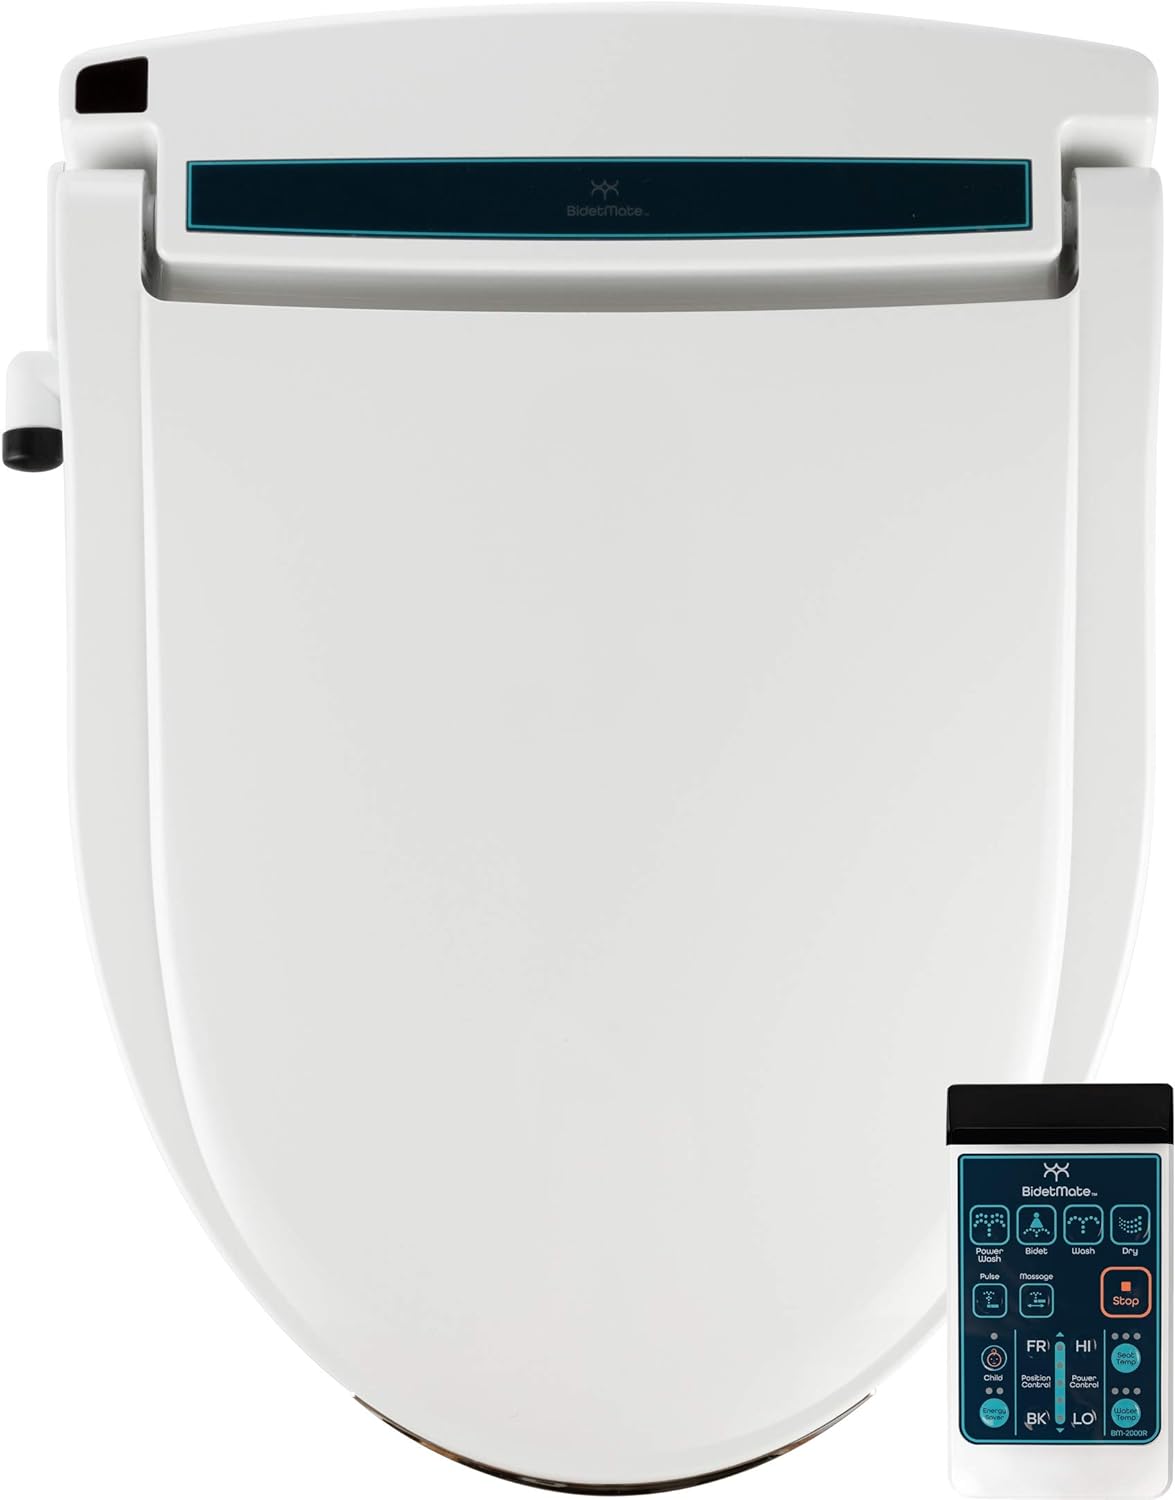 BidetMate 2000 Series Electric Bidet Heated Smart Toilet Seat with Unlimited Heated Water, Remote, and Dryer - Elongated